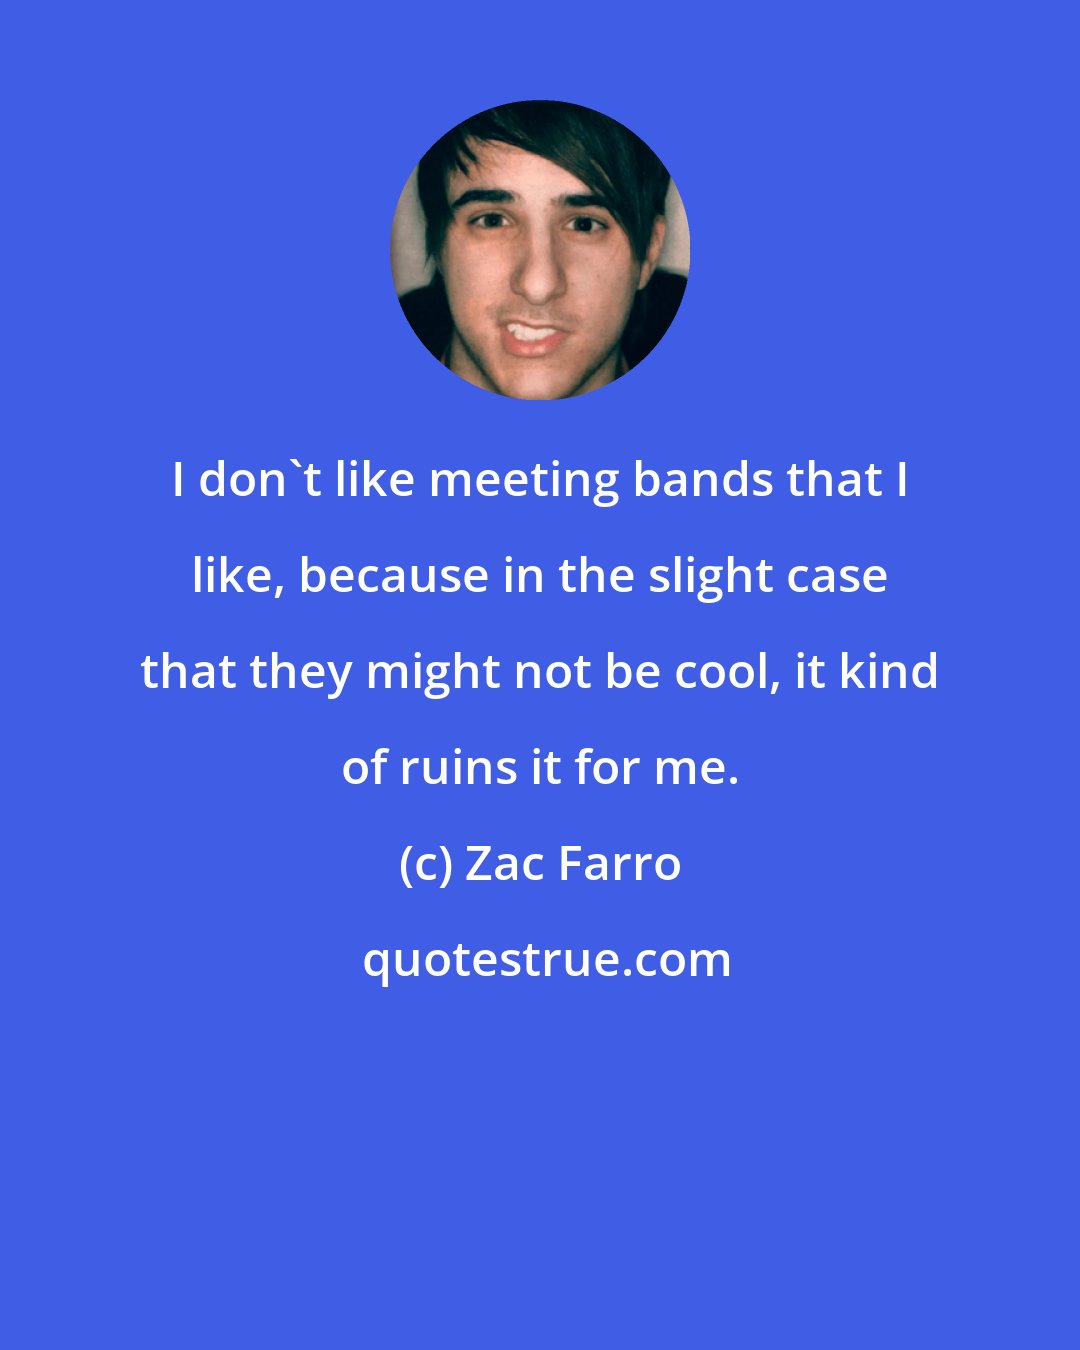 Zac Farro: I don't like meeting bands that I like, because in the slight case that they might not be cool, it kind of ruins it for me.